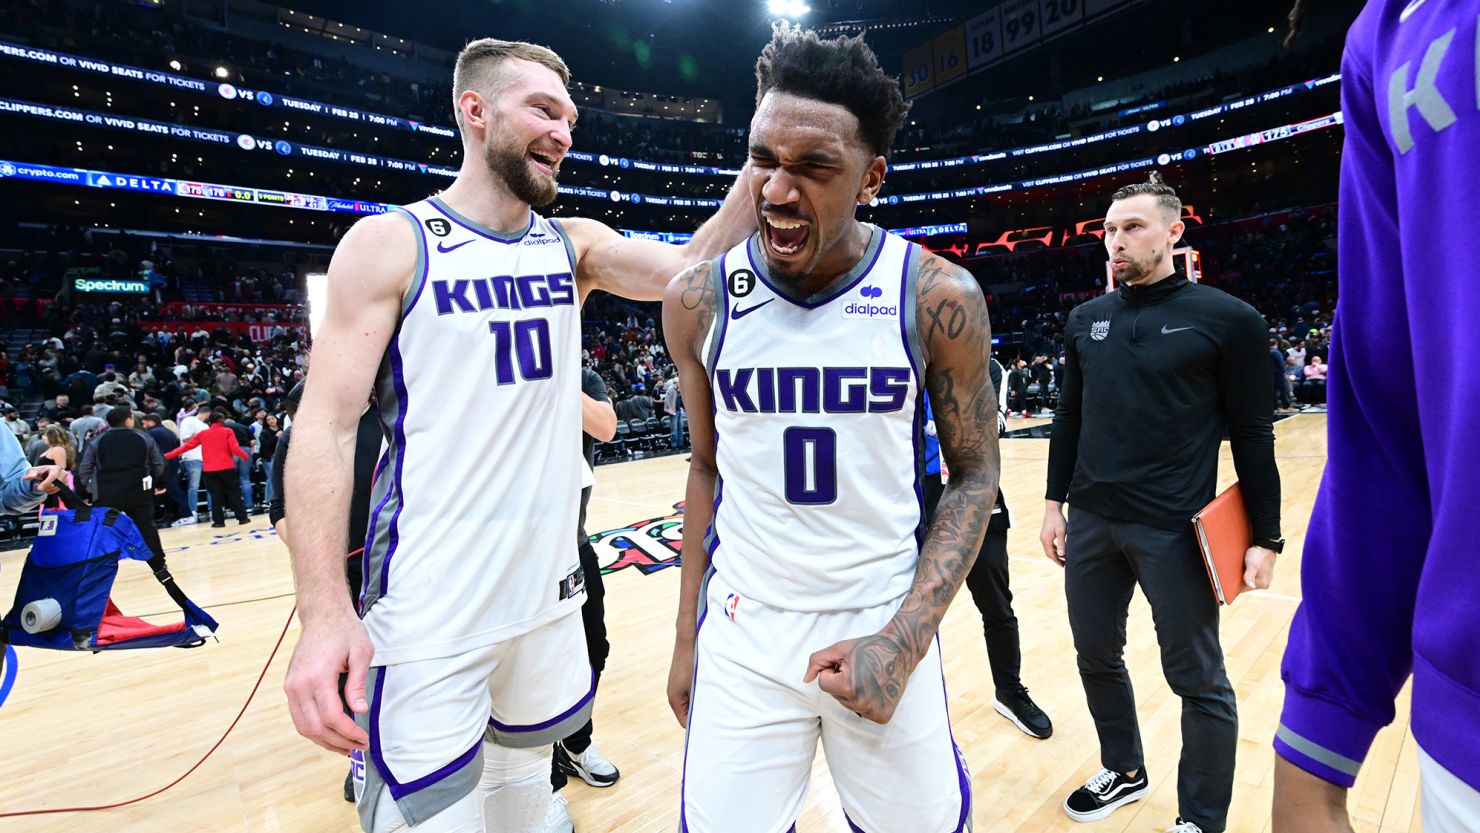 The Sacramento Kings have made the NBA Playoffs for the first time since 2006.